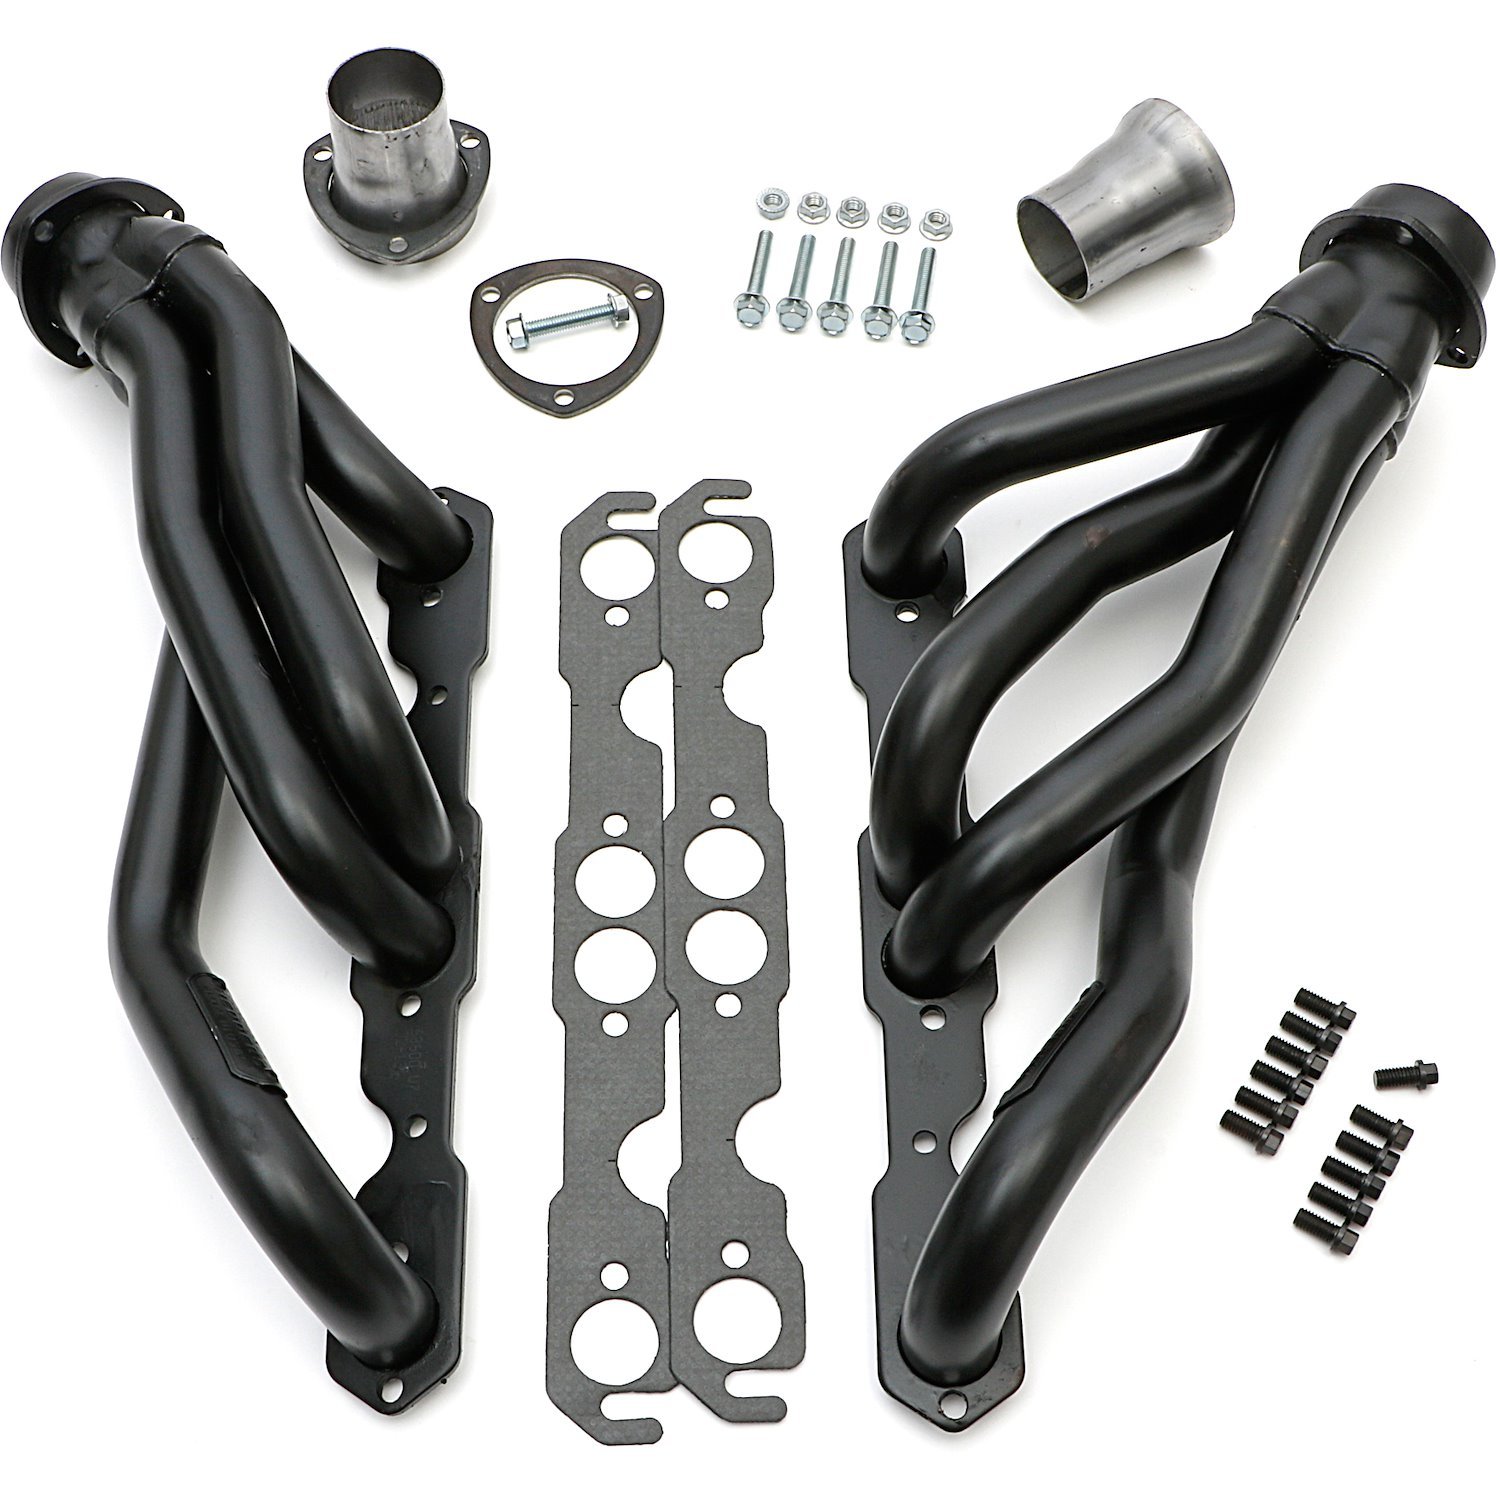 Standard Duty Uncoated Shorty Headers for 1967-81 Camaro